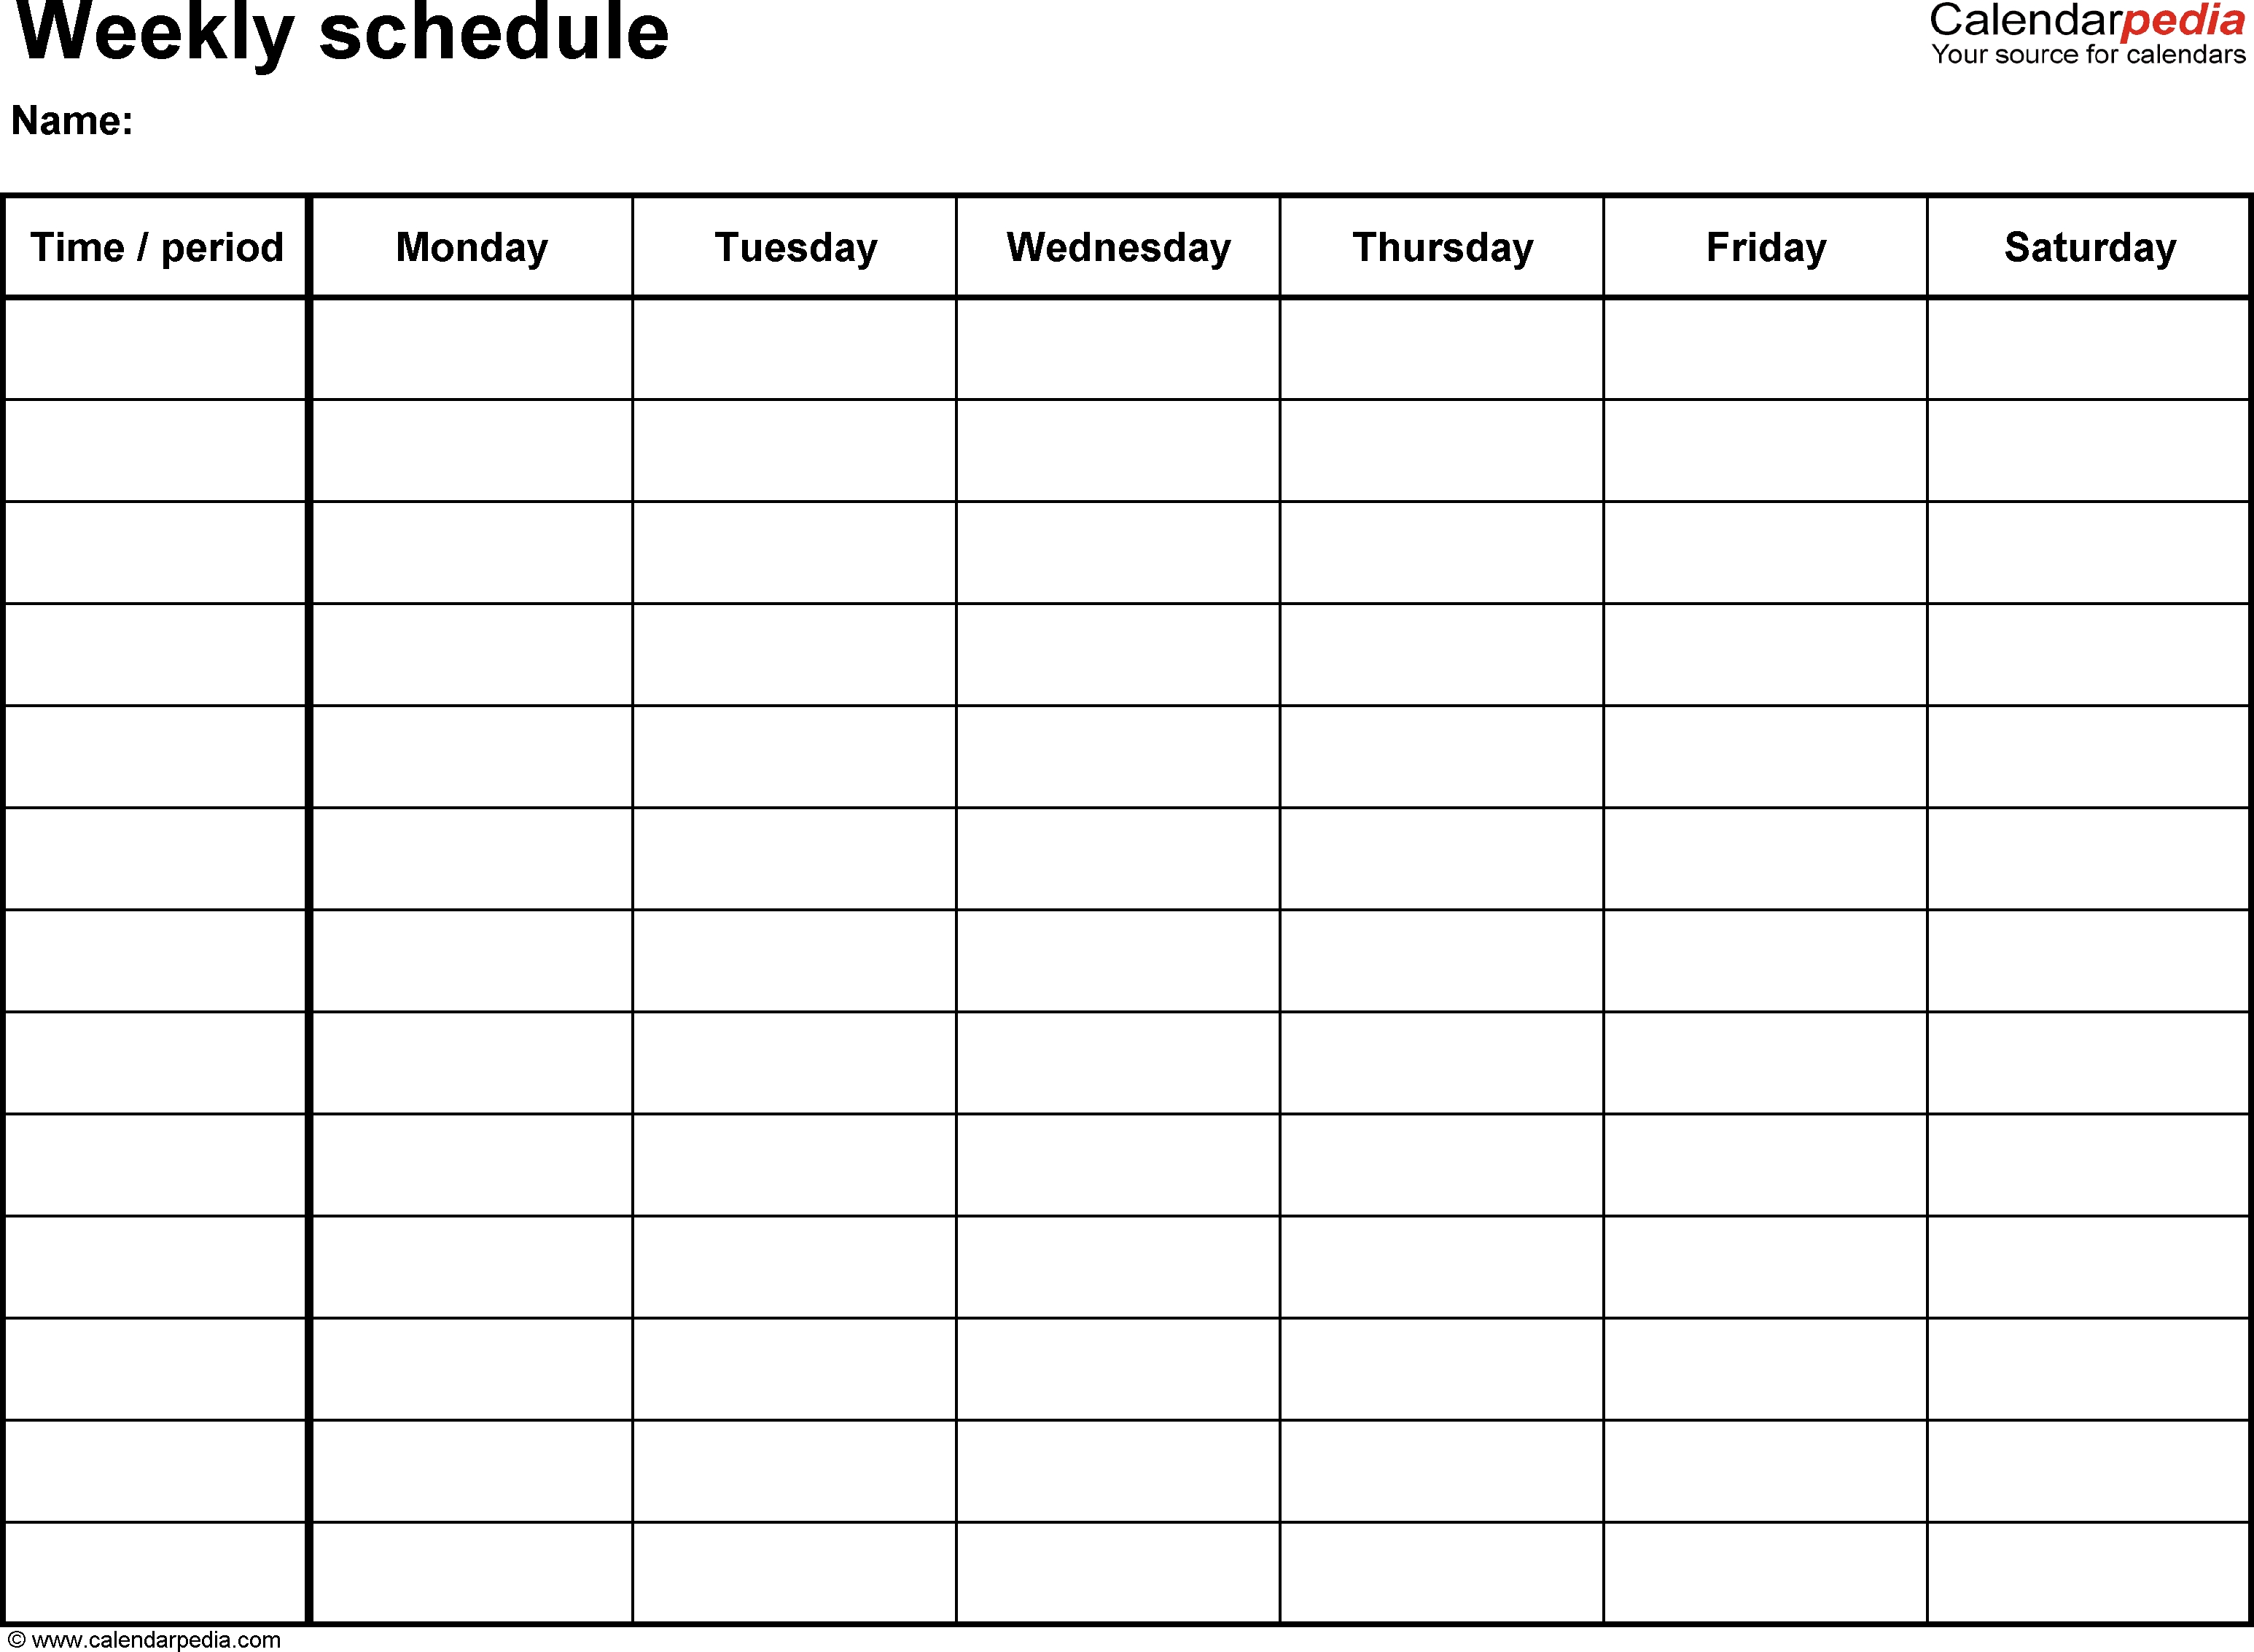 Free Weekly Schedule Templates For Word - 18 Templates-Monday To Friday Blank Calendar